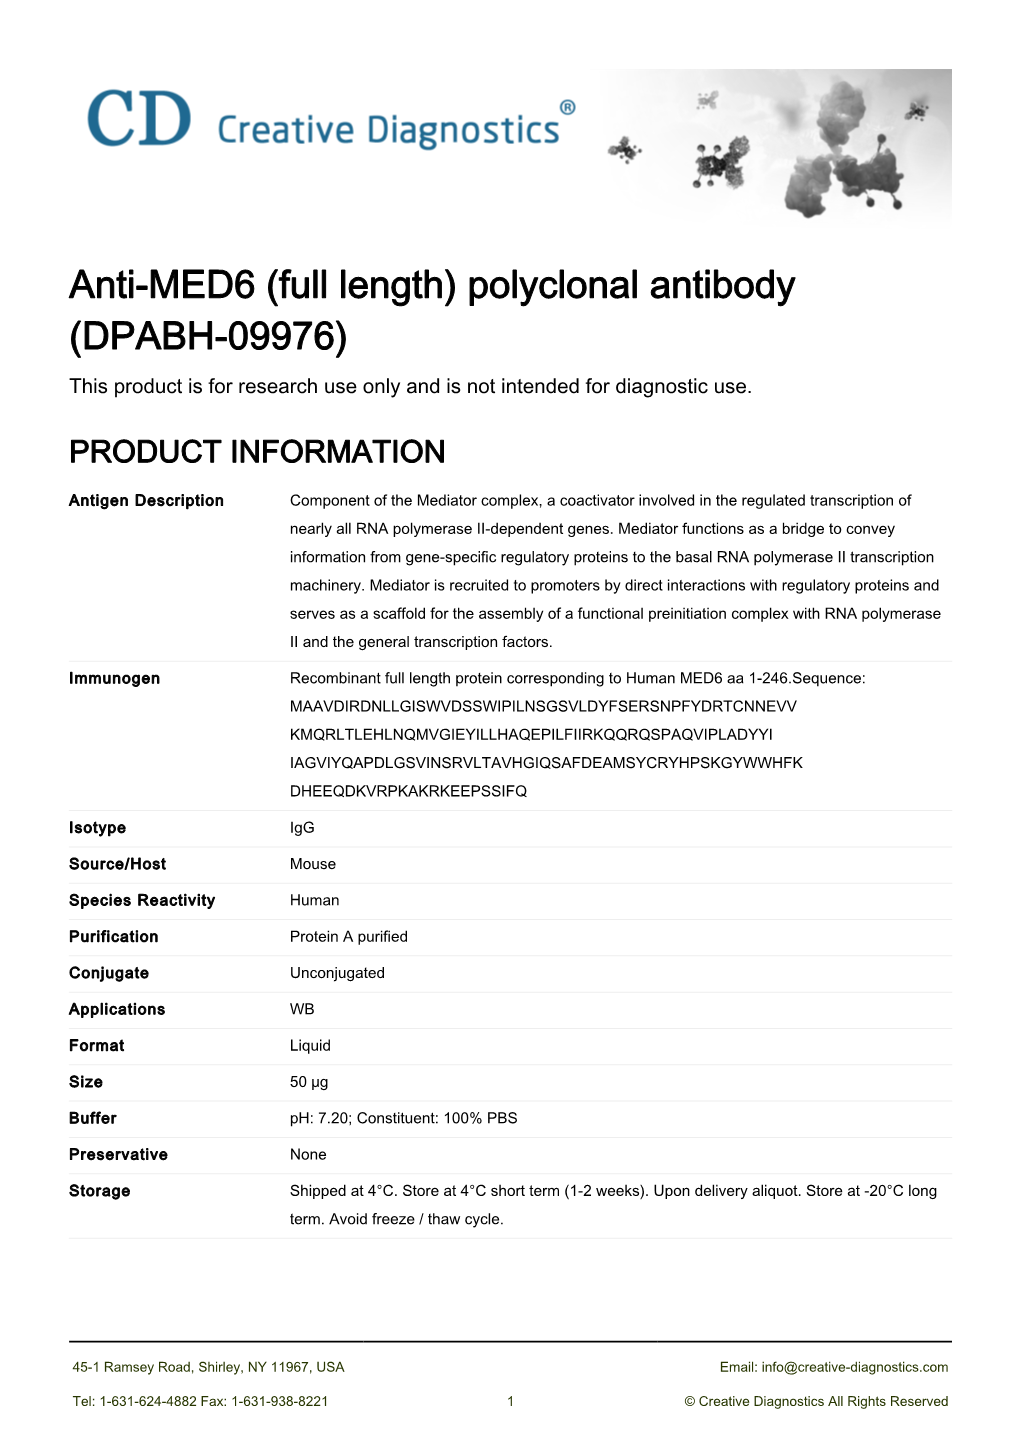 Anti-MED6 (Full Length) Polyclonal Antibody (DPABH-09976) This Product Is for Research Use Only and Is Not Intended for Diagnostic Use